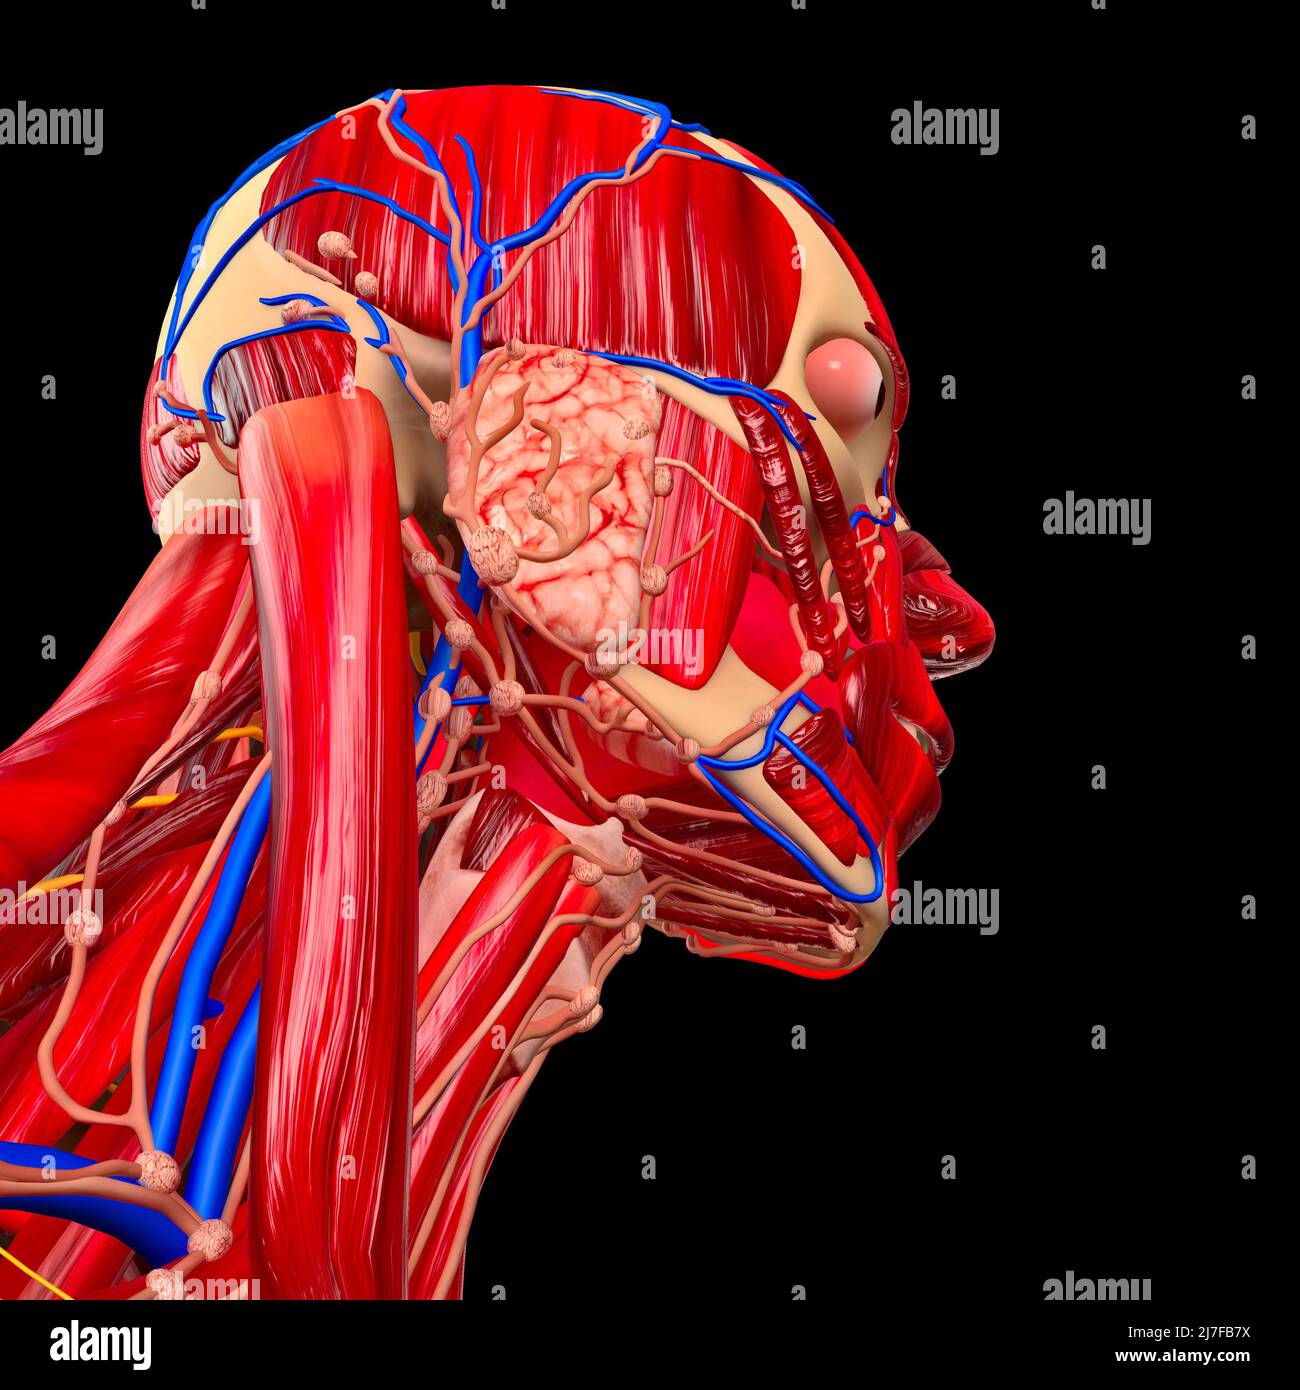 Neck and muscles, salivary glands, swallowing food, digestive problems. Anatomy of the human body. Dysphagia. Trachea Stock Photo